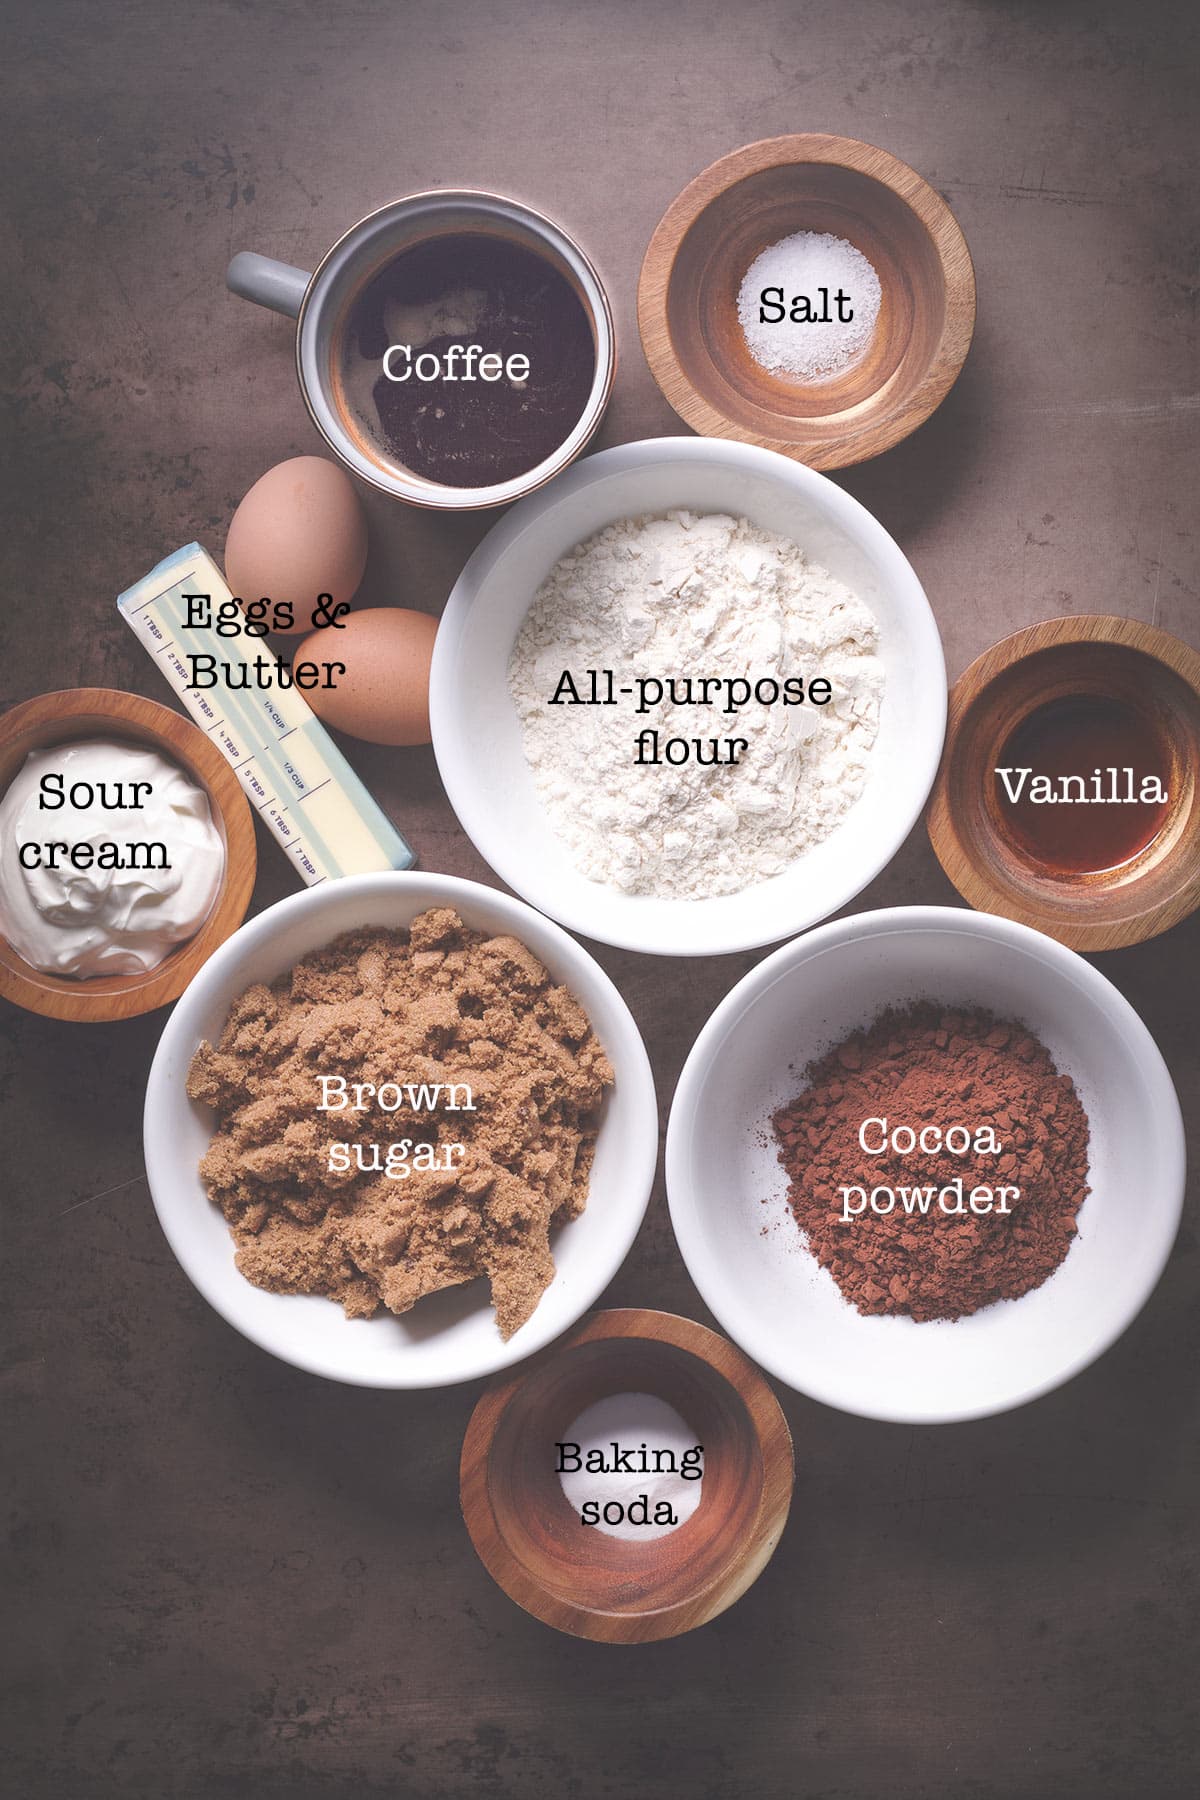 All the ingredients you need to bake a Dutch oven chocolate cake.